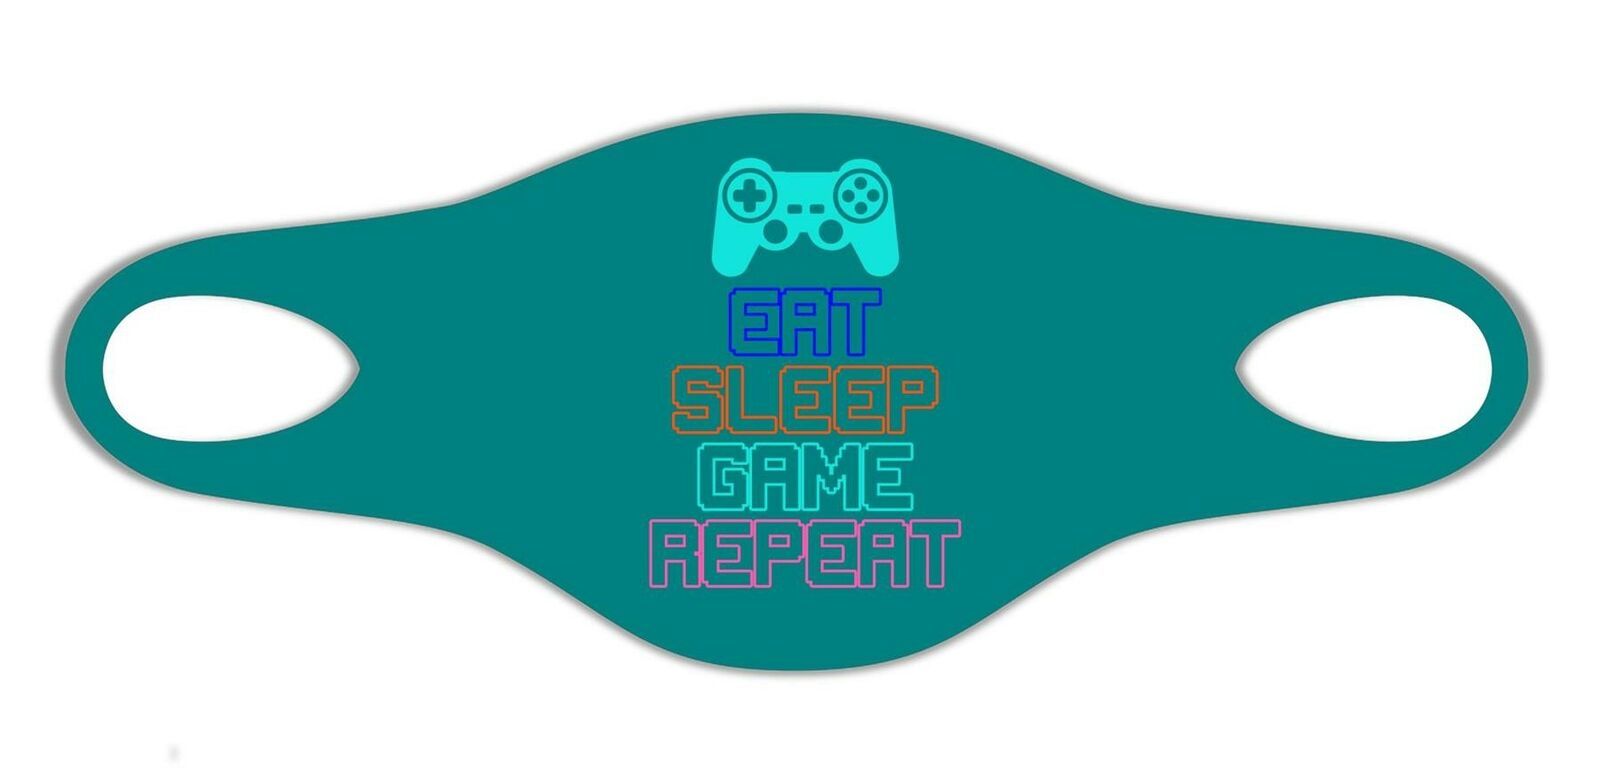 Body-soul-n-spirit - Eat sleep game repeat funny humor protective wash soft face mask